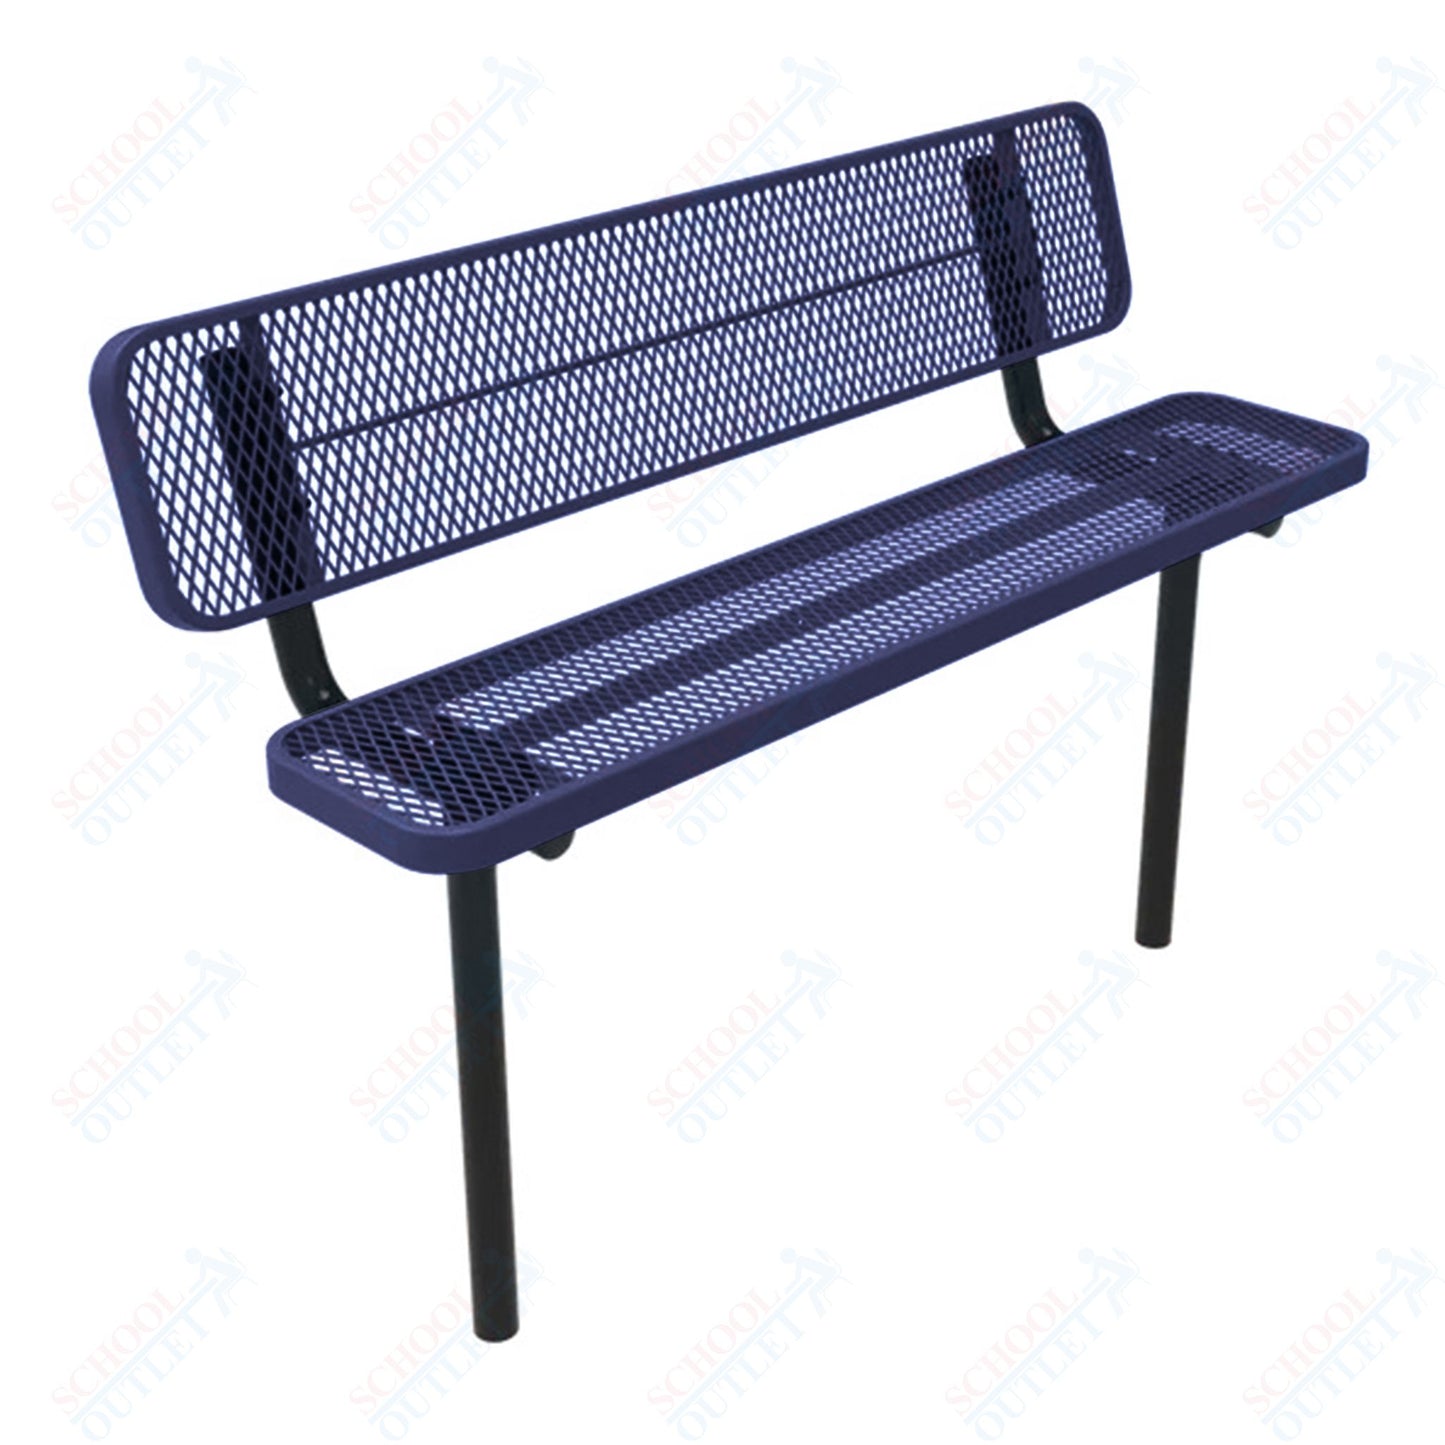 MyTcoat - Player's Outdoor Bench with Back - Inground Mount 4' L (MYT-BPY04-31)